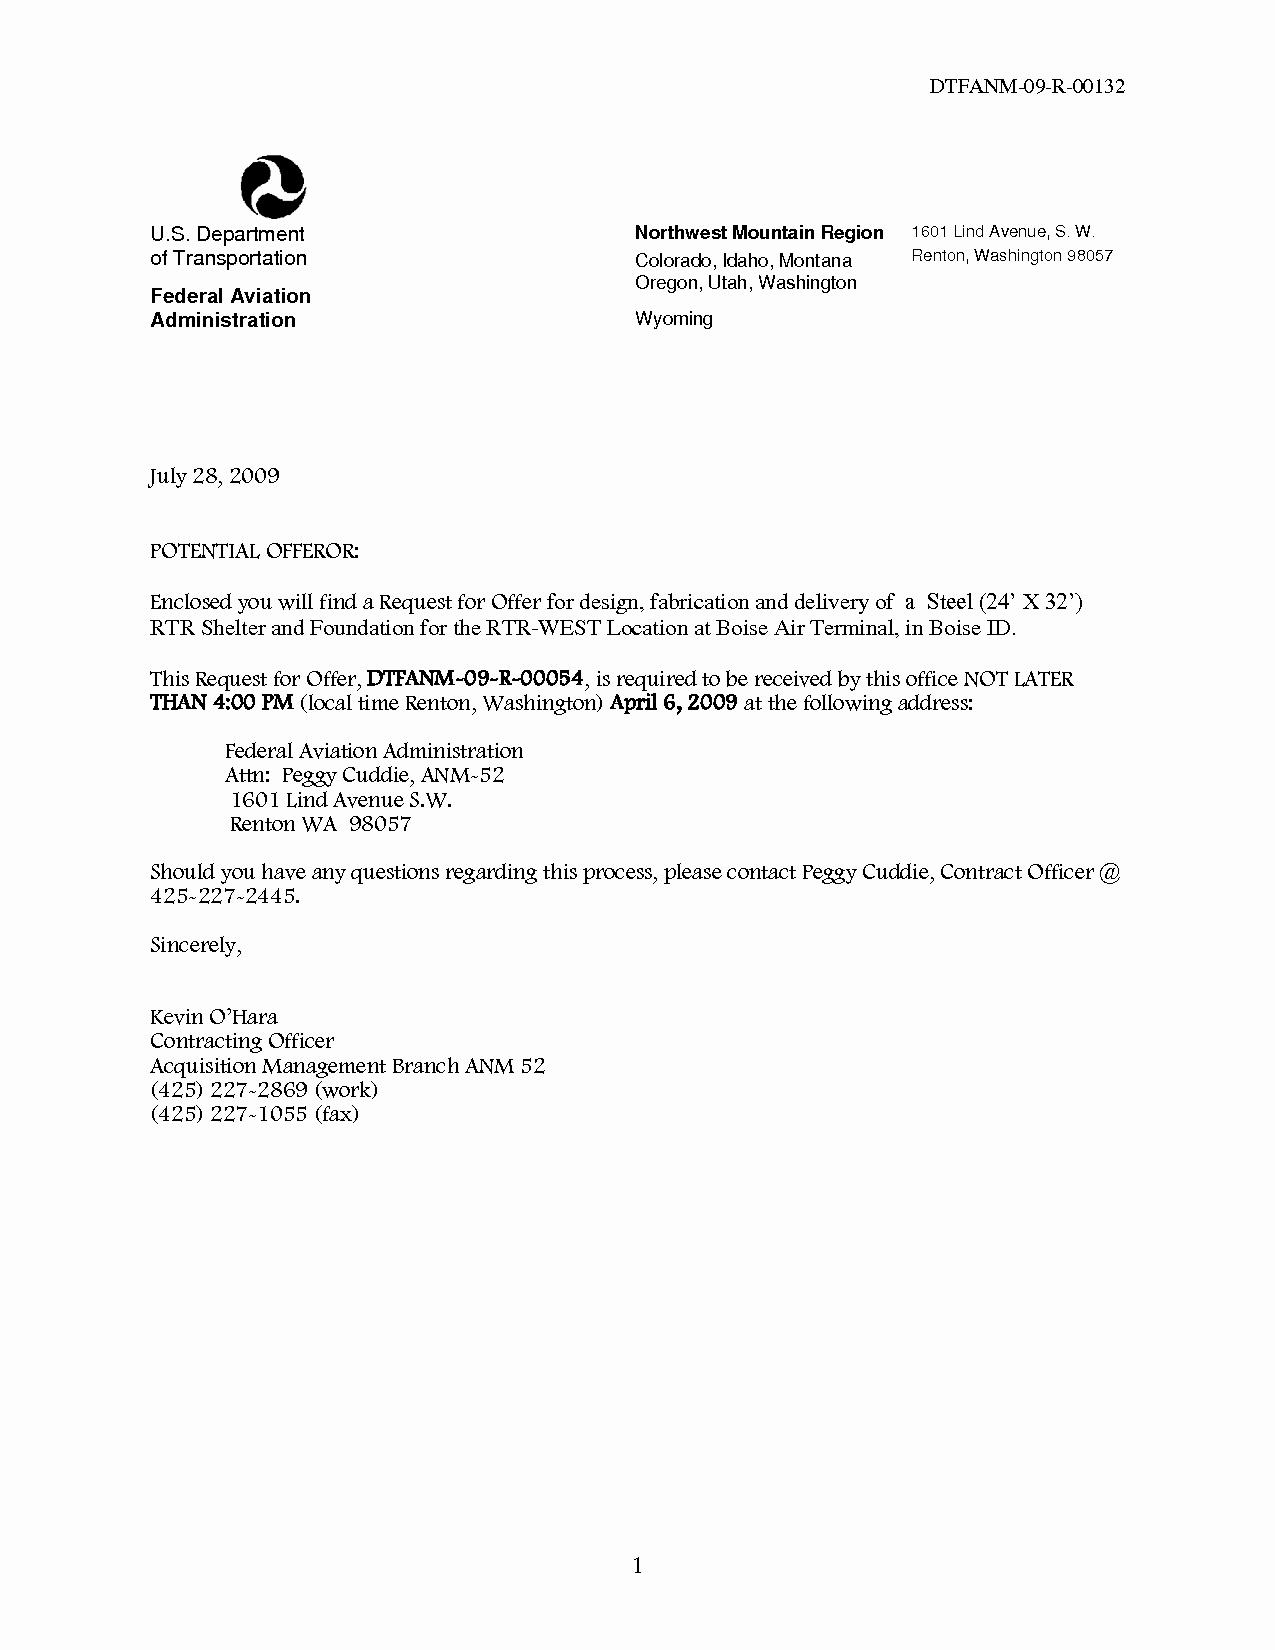 Letter Of Reference Vs Recommendation Lovely Bank Reference Letter Template Mughals